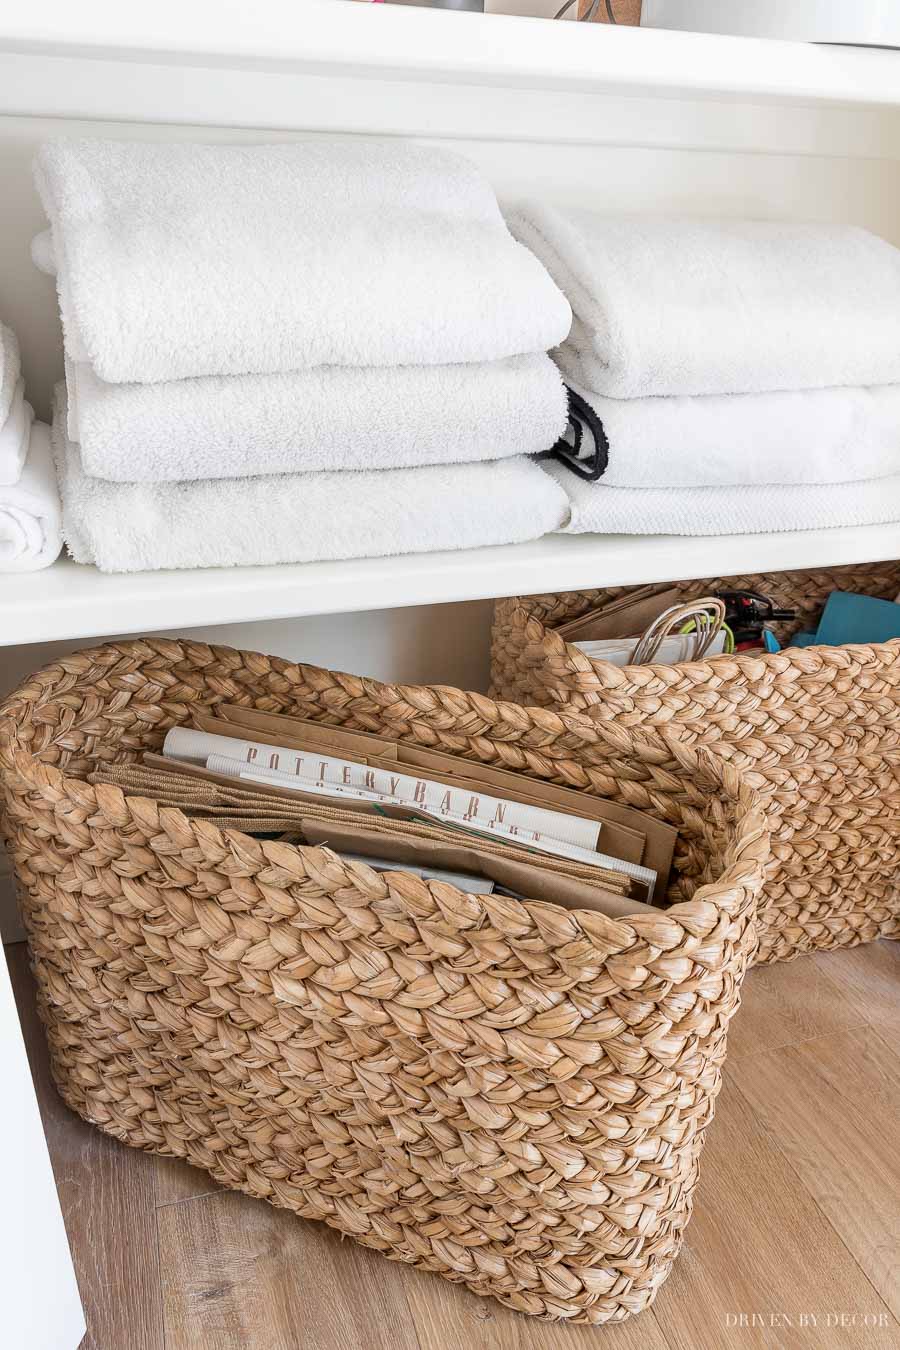 Decorating With Baskets: 10 Favorite Ideas! - Driven by Decor